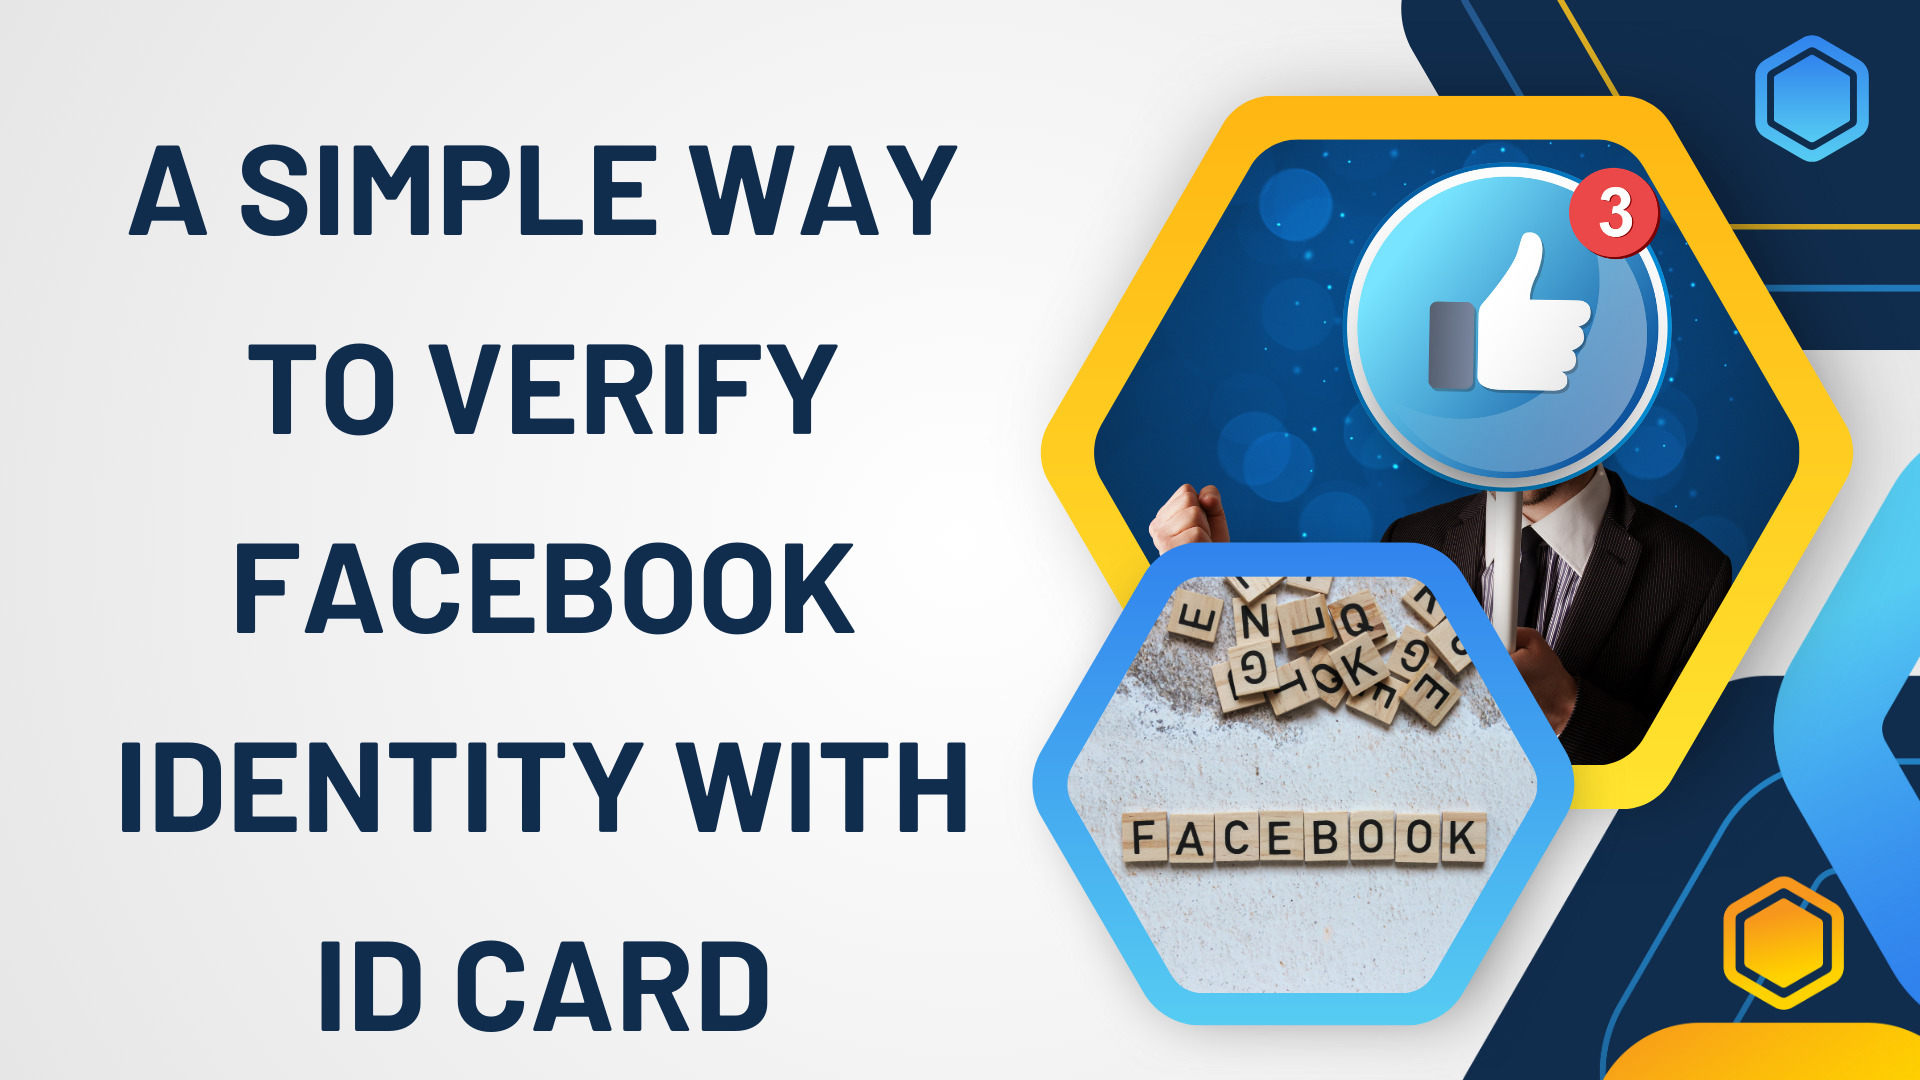 A simple way to verify Facebook identity with ID card